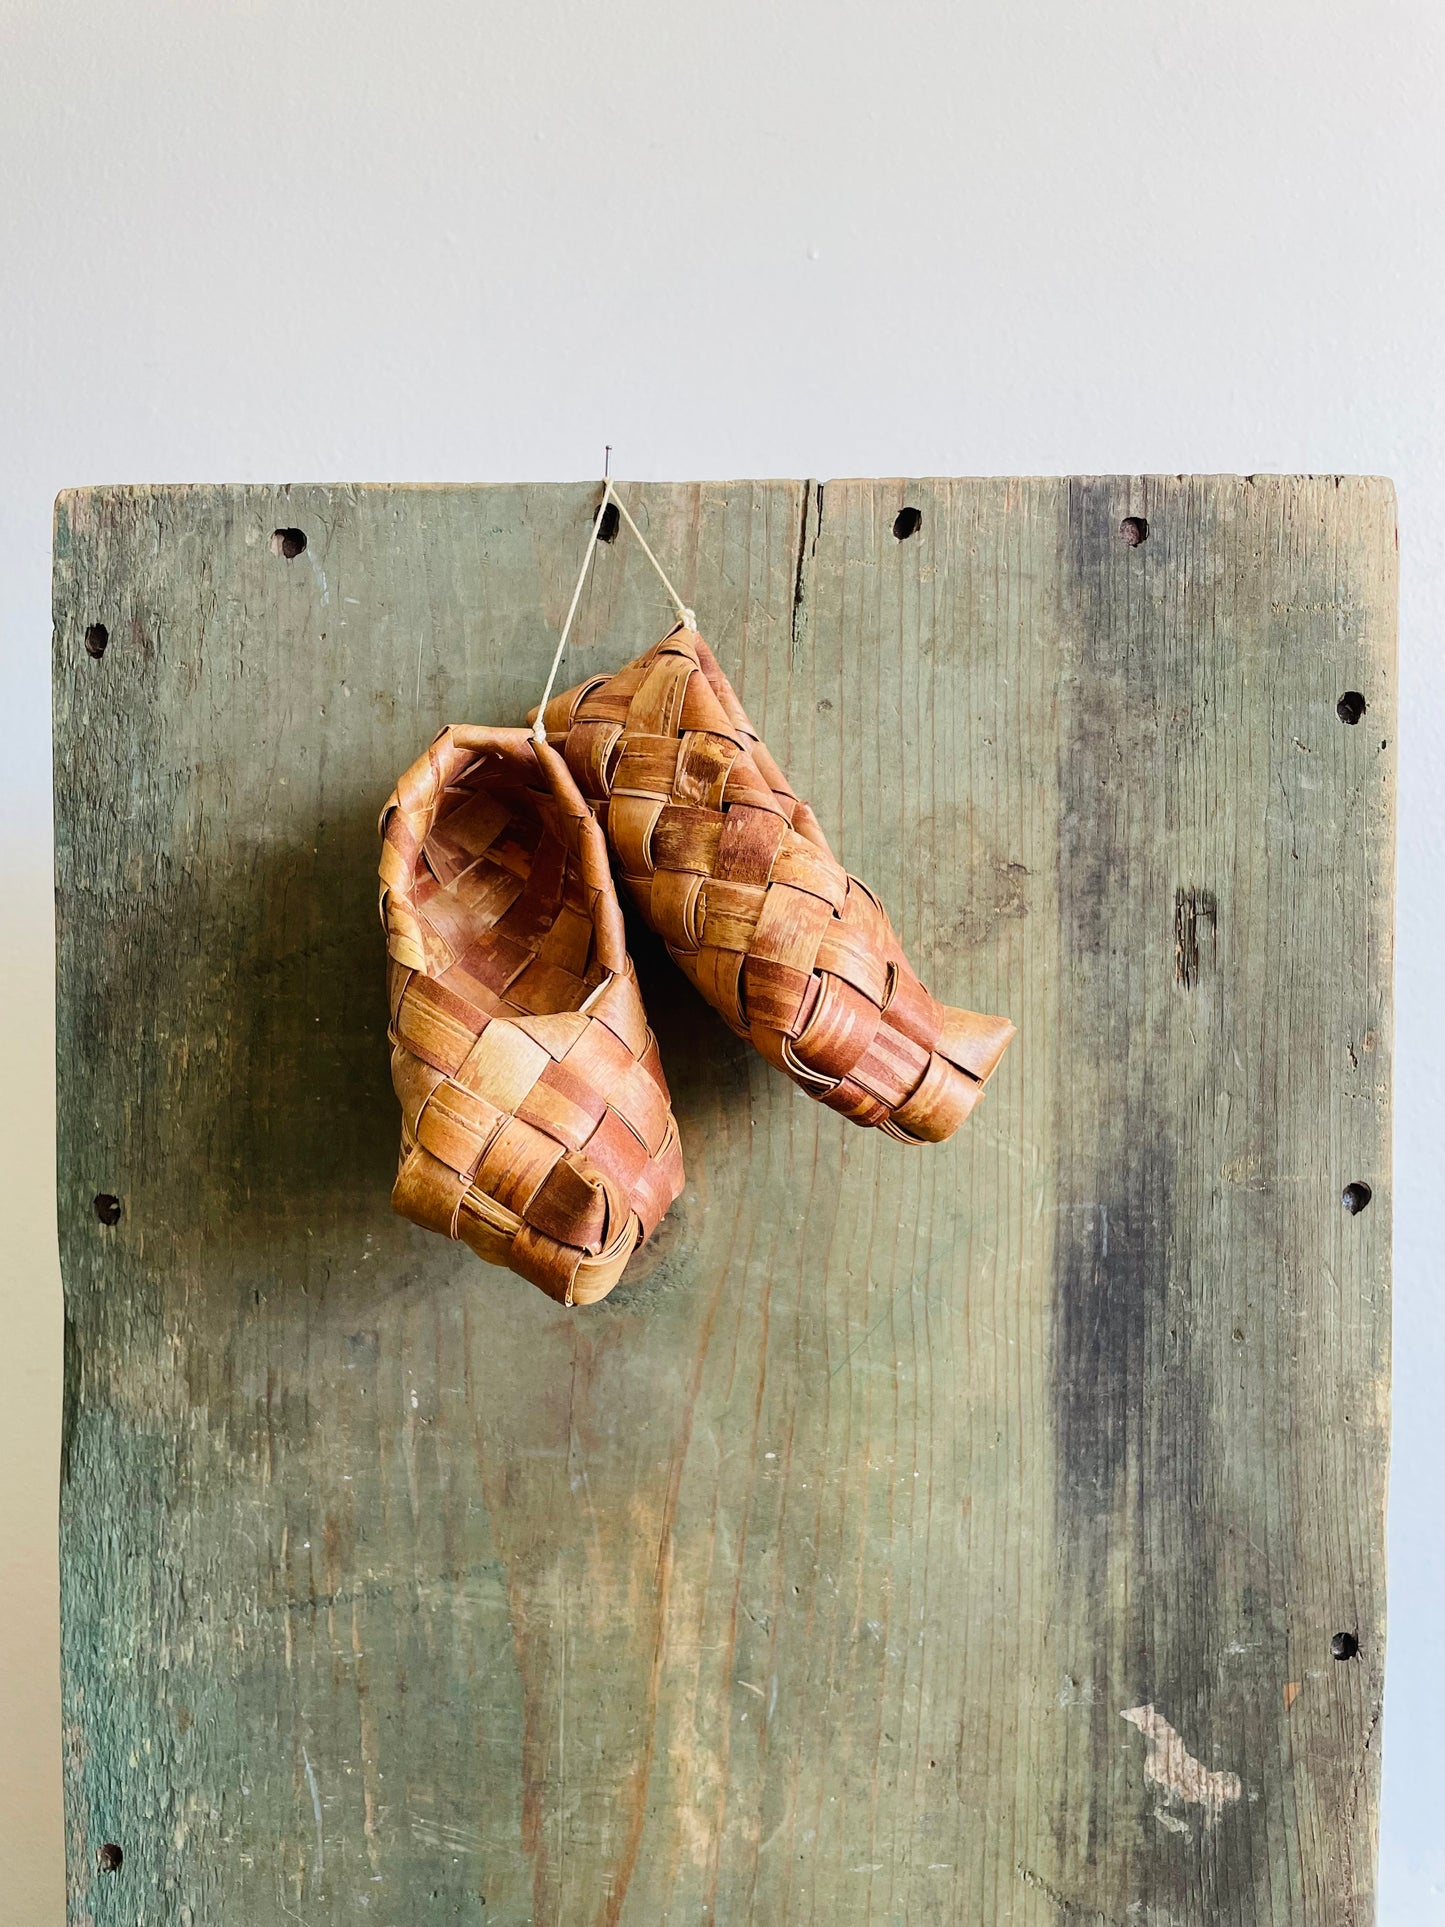 Finnish Birch Bark Woven Wood Shoes # 1 - Set of 2 Hanging on Rope